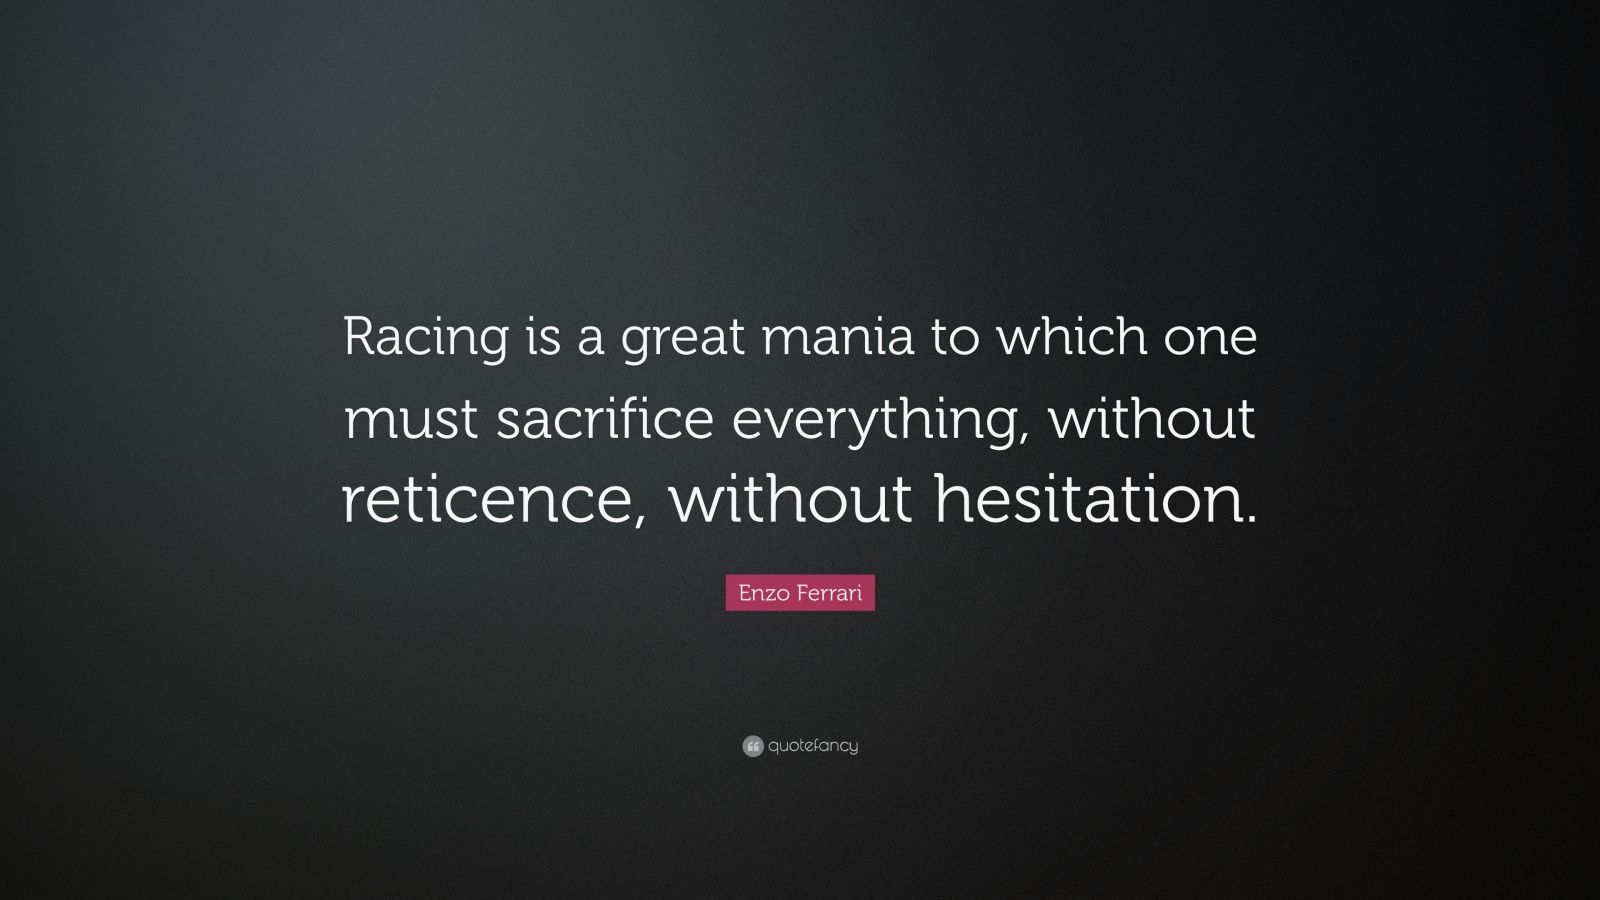 Enzo Ferrari Quote: “Racing is a great mania to which one must ...